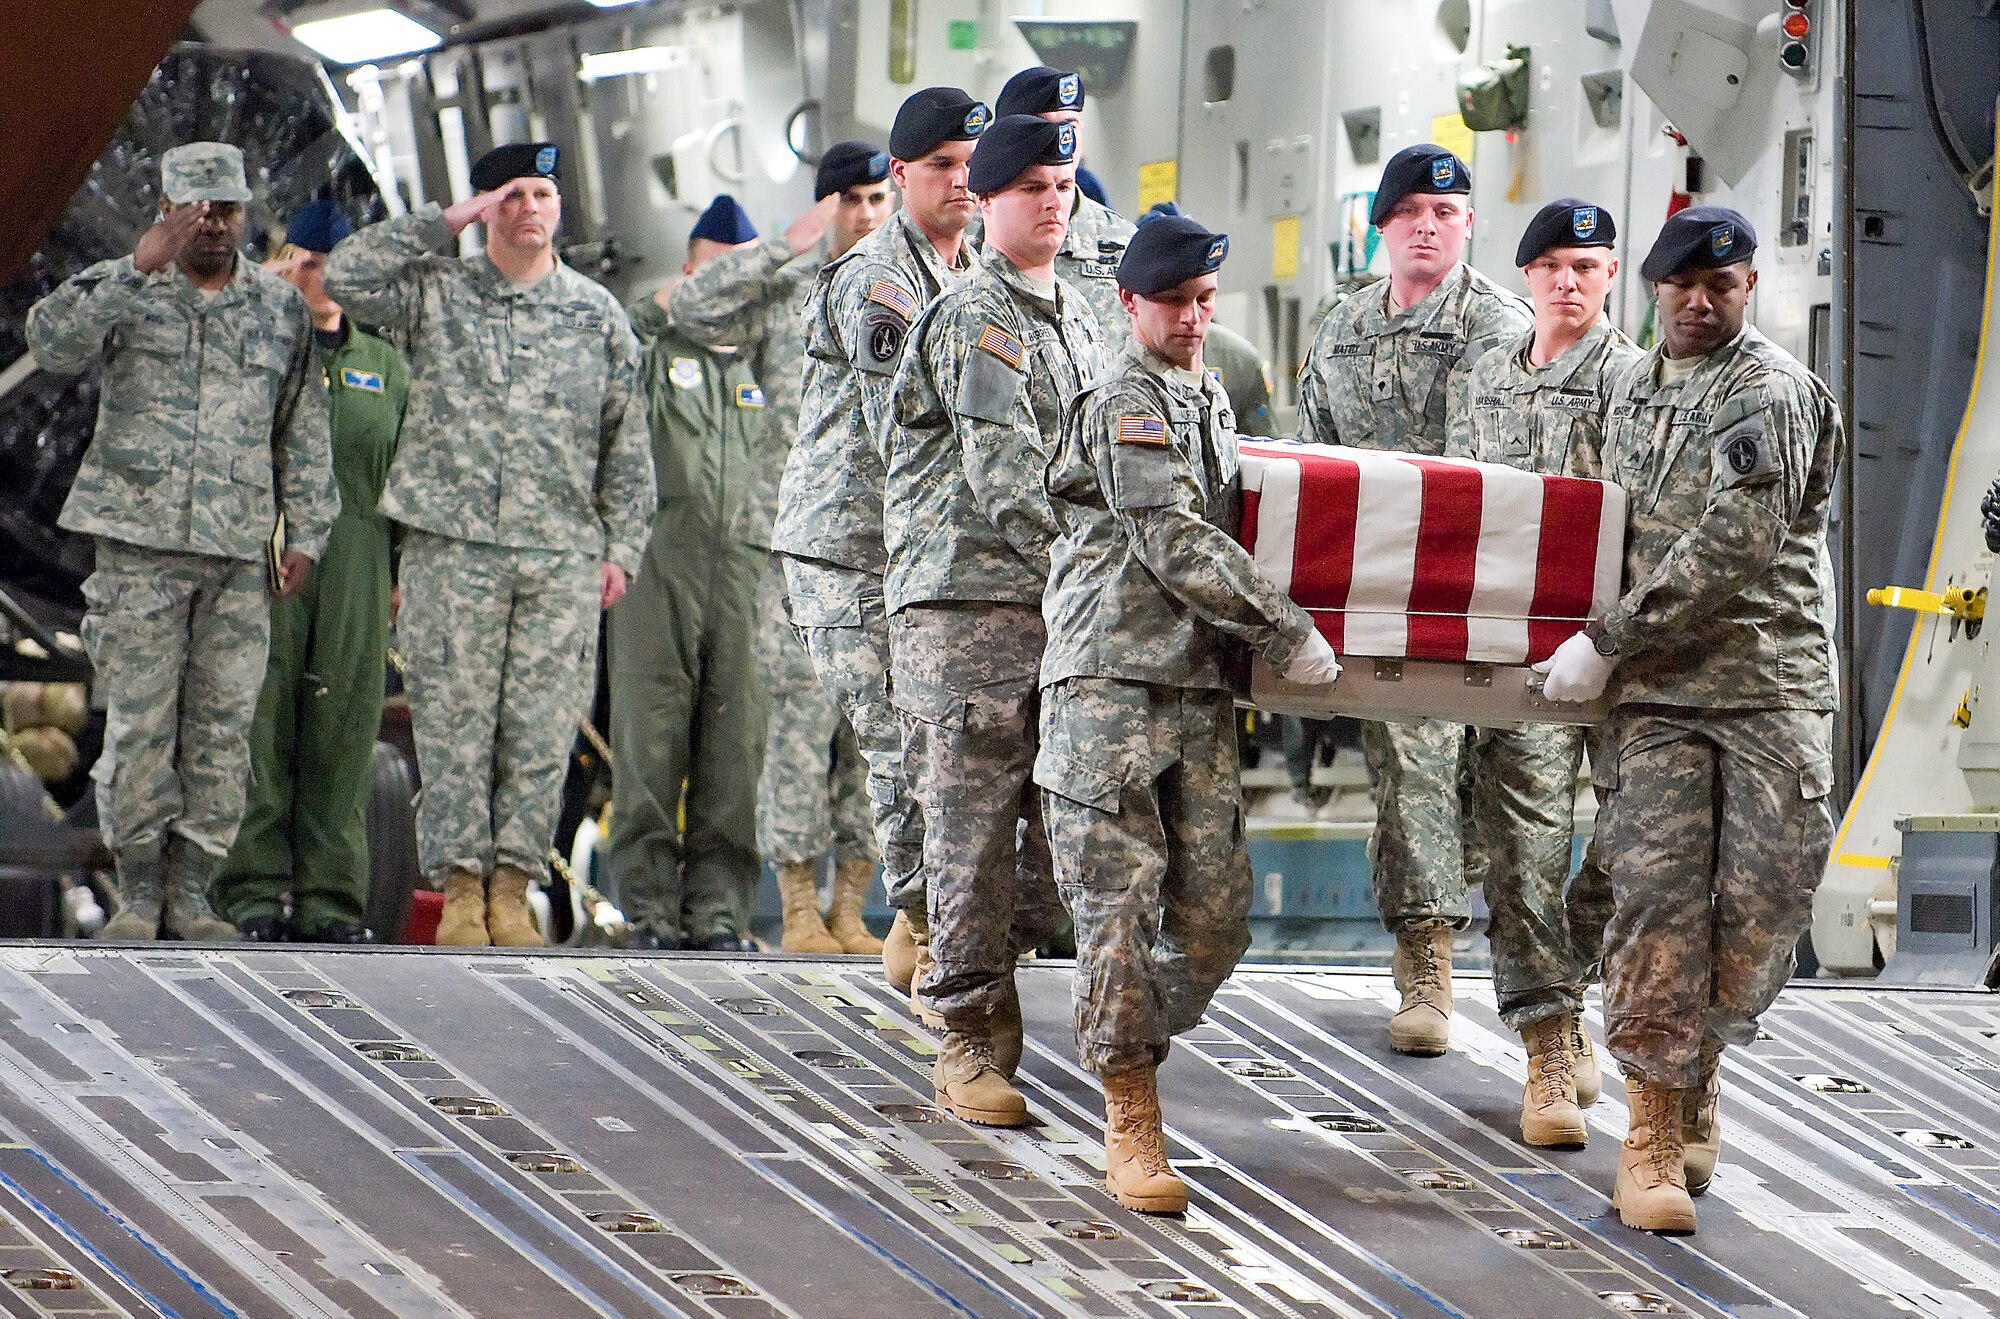 An Army carry team transfers the remains of Army Spc. Israel Candelaria Mejias, of San Lorenzo, Puerto Rico, at Dover Air Force Base, Del., April 7. Specialist Candelaria Mejias died April 5 near Baghdad, Iraq, of wounds sustained when a mine detonated near him during combat operations. He was assigned to the 1st Battalion, 2nd Infantry Regiment in Task Force 3rd Battalion, 66th Armor Regiment, 172nd Brigade Combat Team, Grafenwoehr, Germany. (U.S. Air Force photo/Roland Balik)